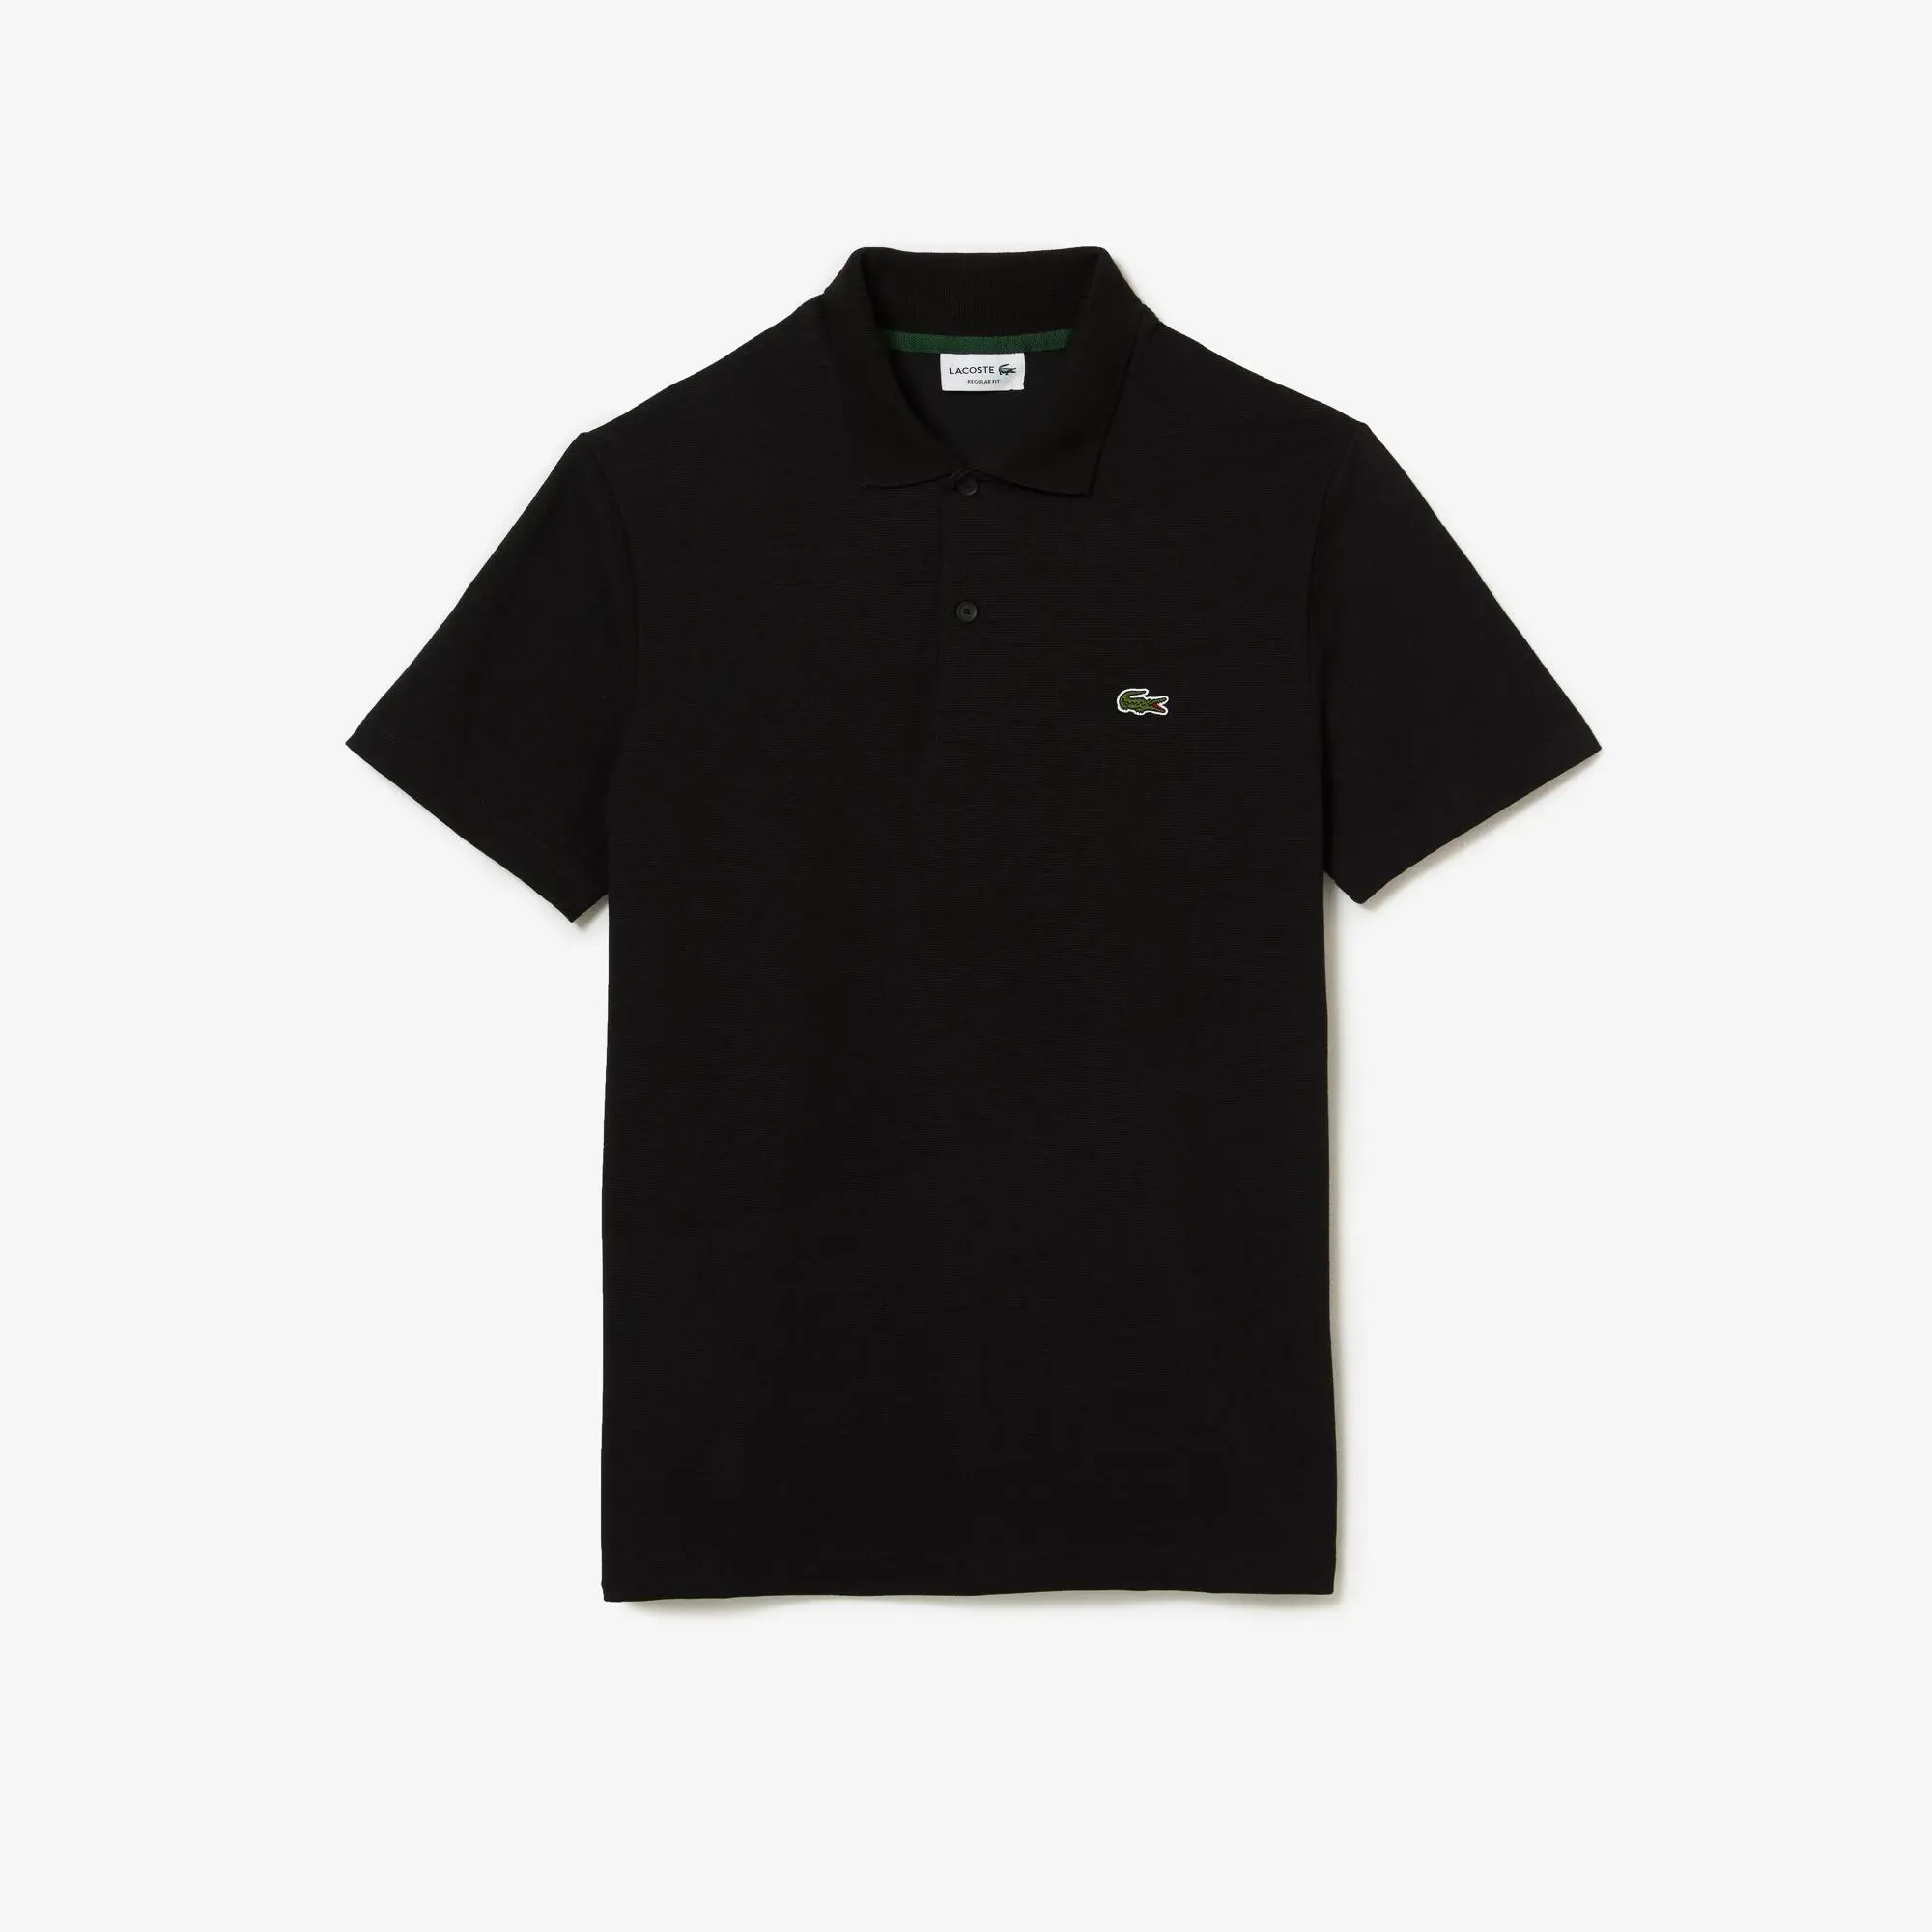 Lacoste Regular Fit Polyester Cotton Polo Shirt. 2